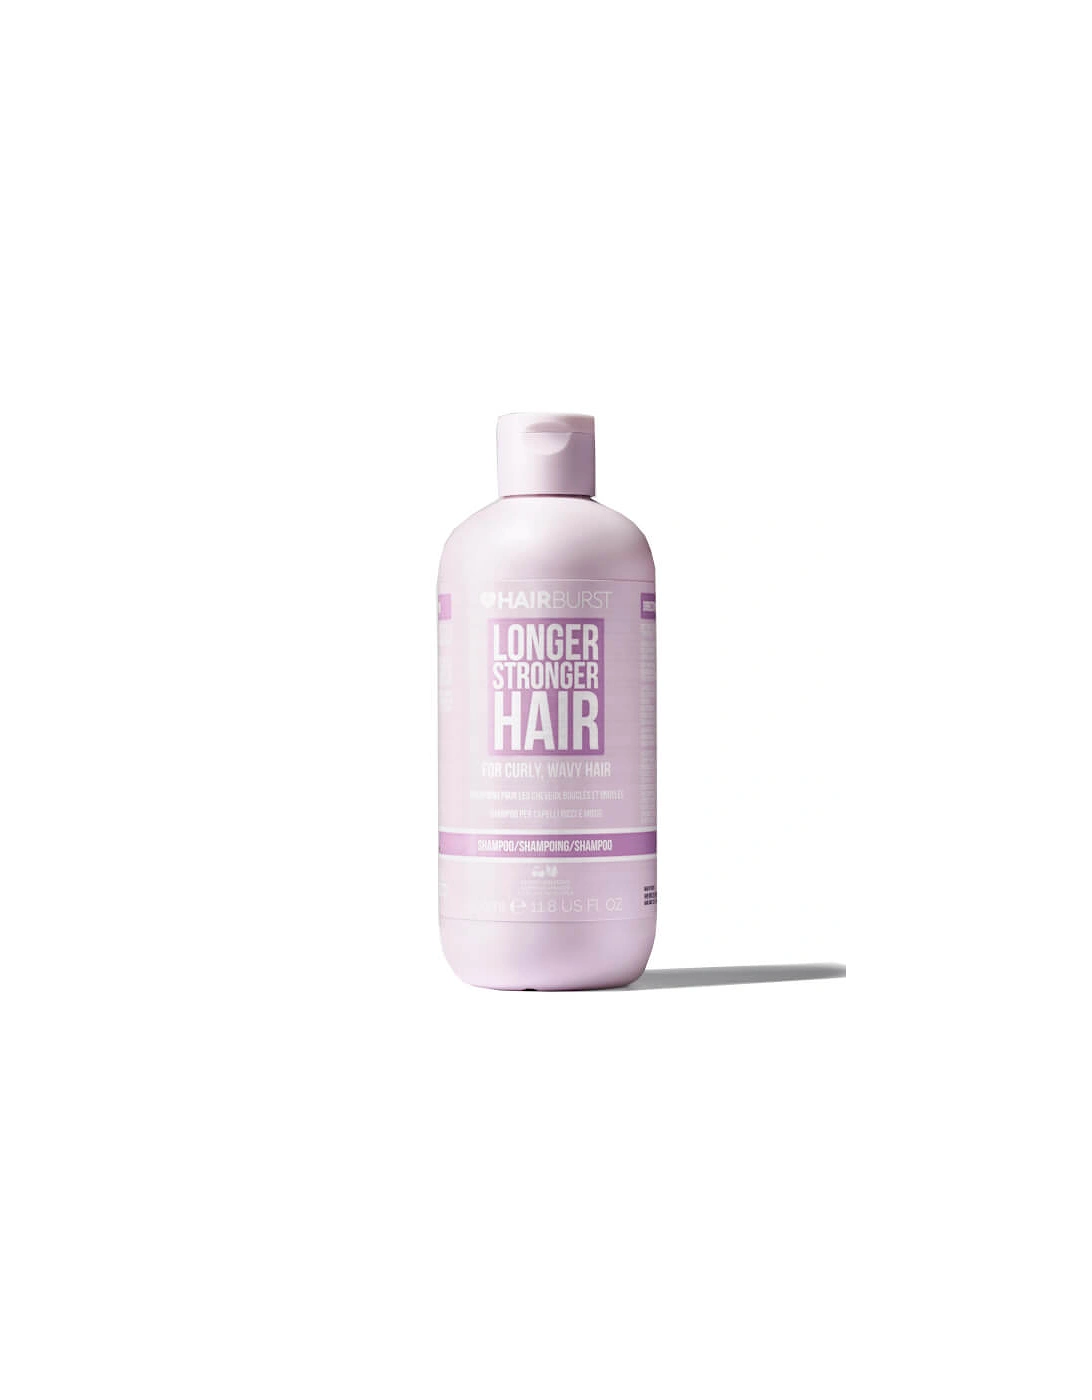 Shampoo for Curly, Wavy Hair 350ml, 2 of 1